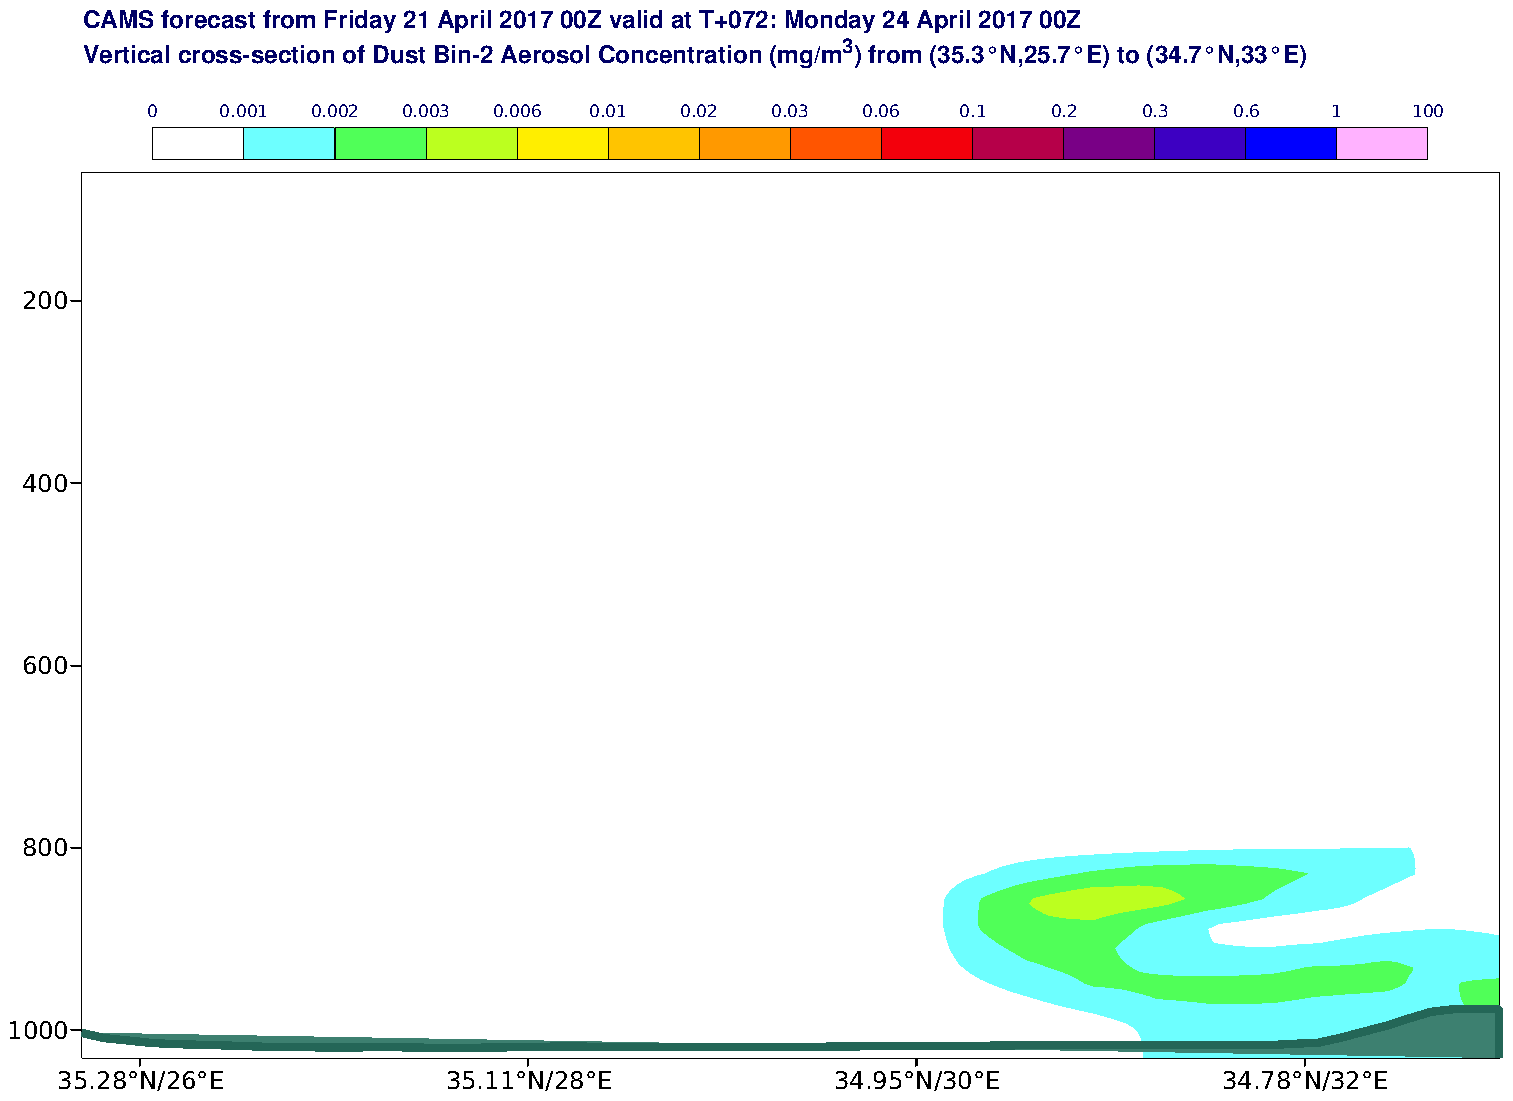 Vertical cross-section of Dust Bin-2 Aerosol Concentration (mg/m3) valid at T72 - 2017-04-24 00:00